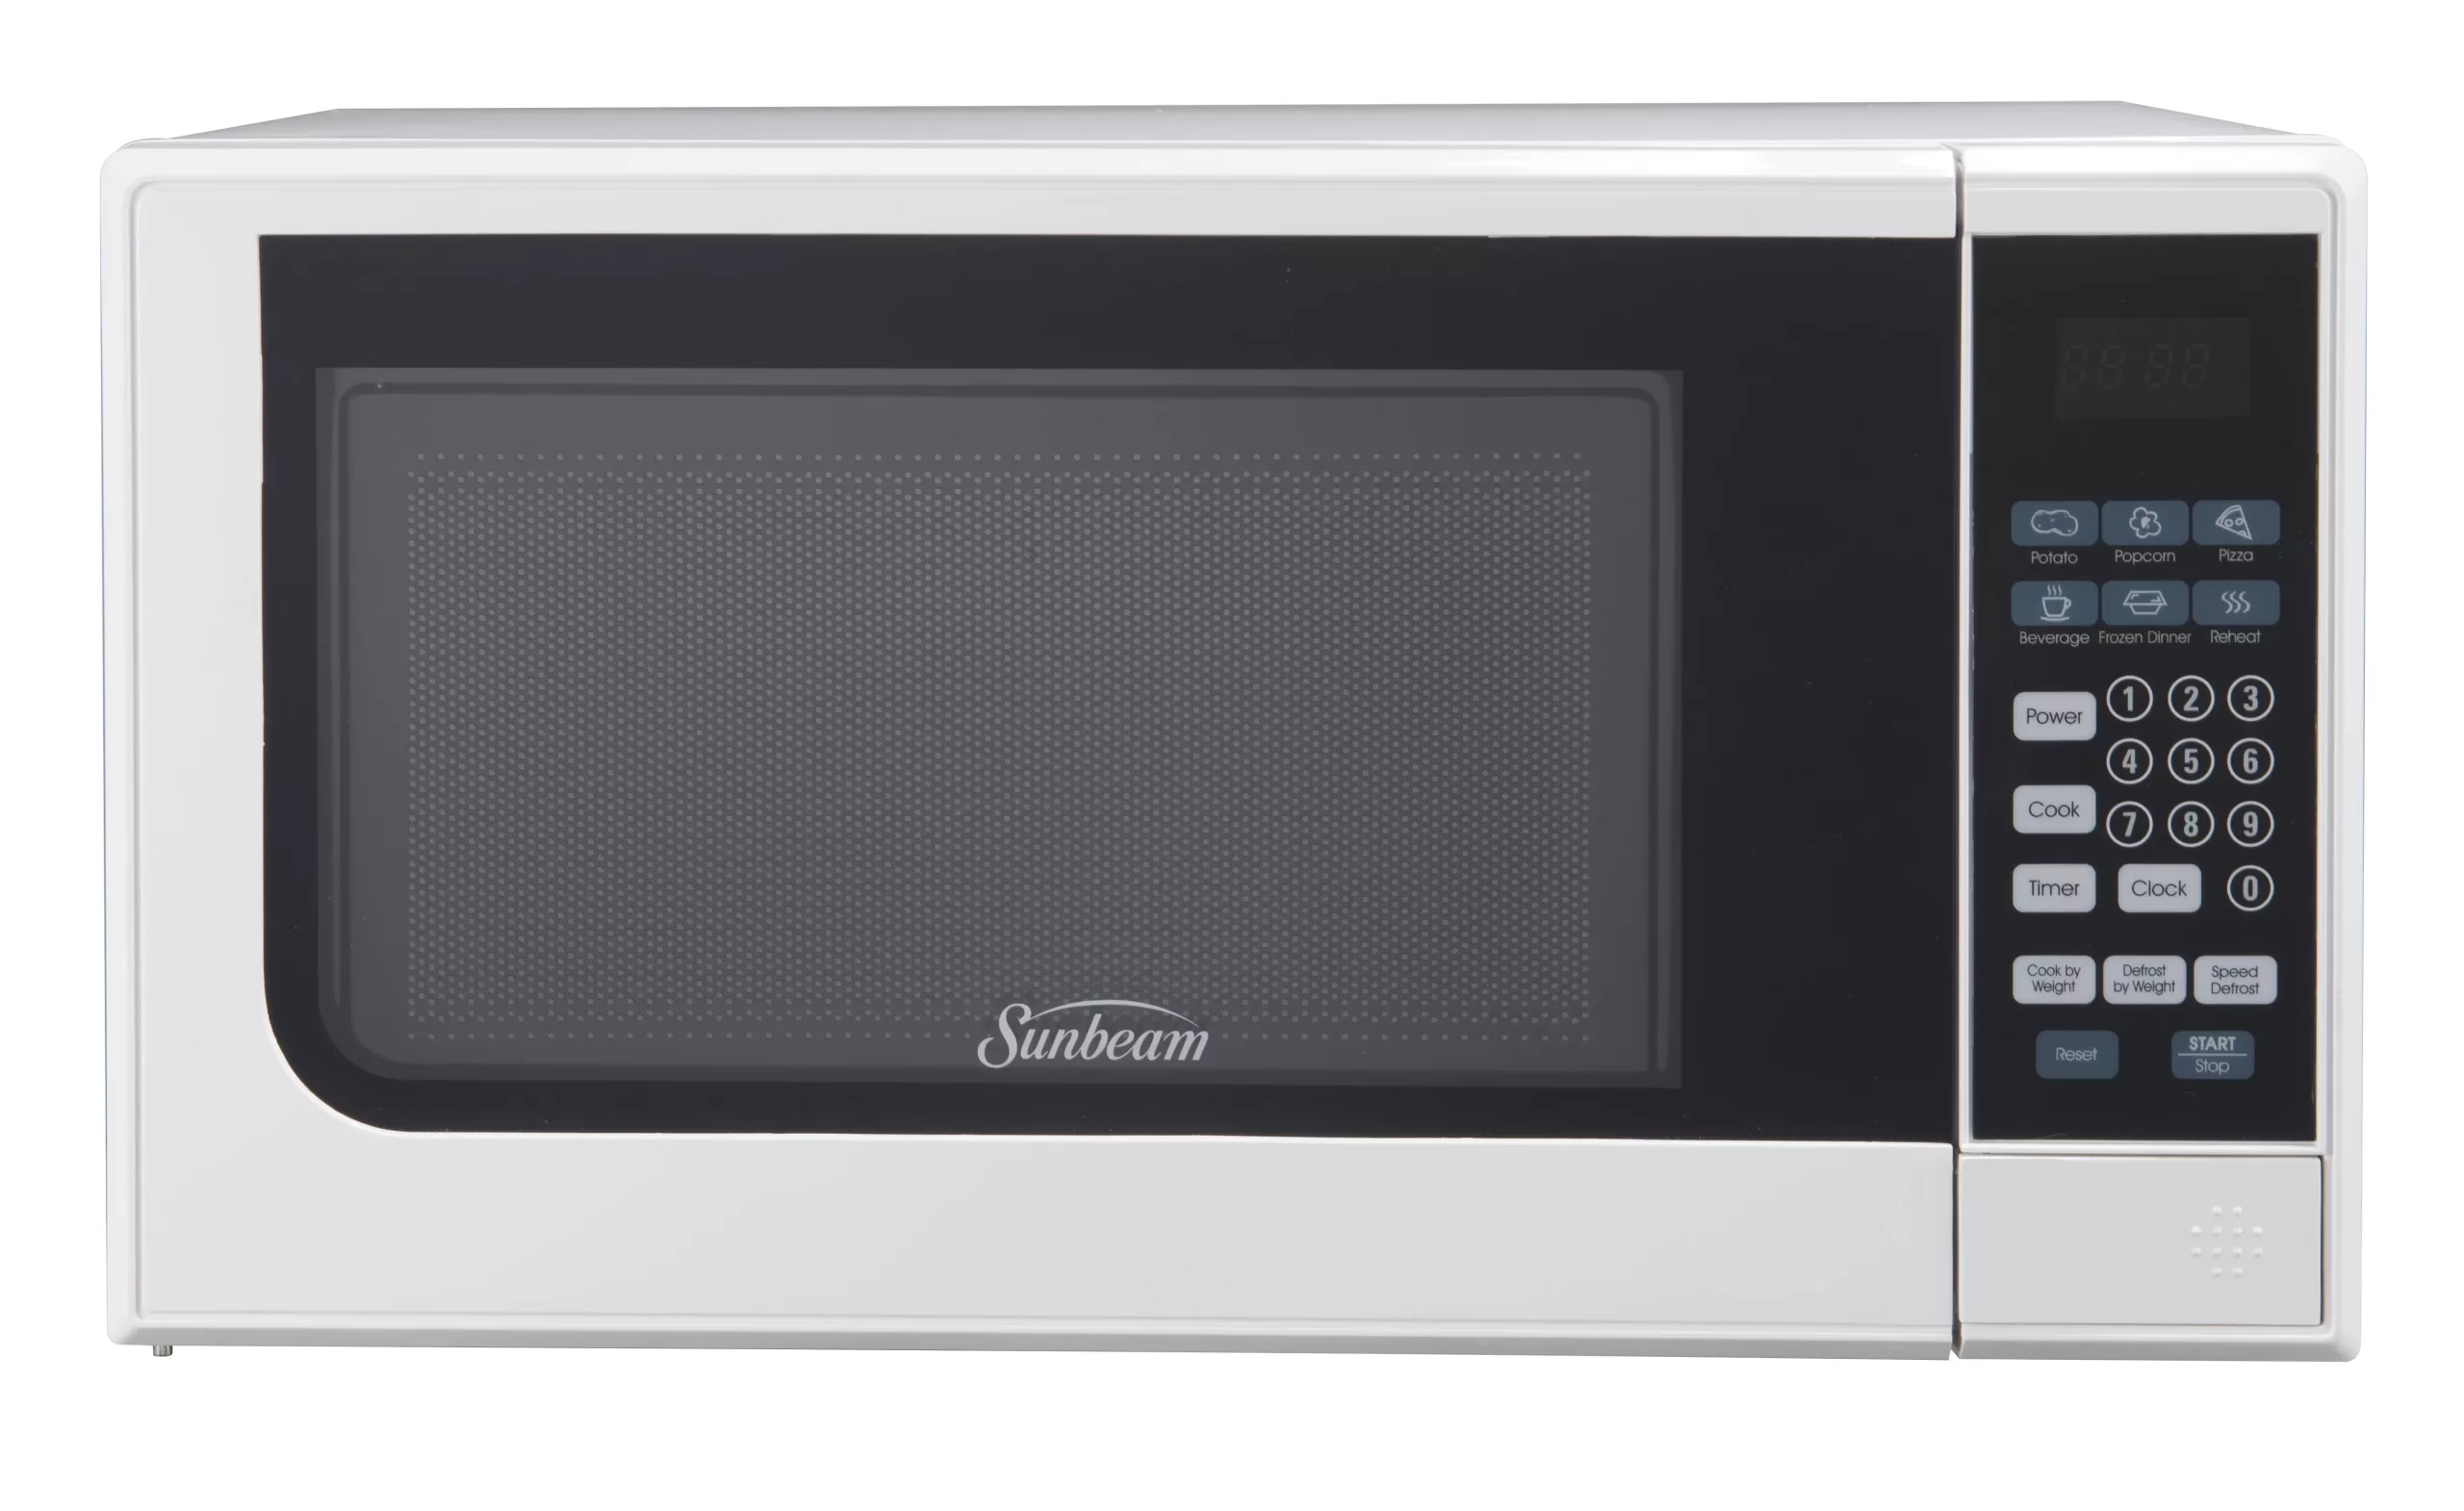 How to set a click on a sunbeam microwave